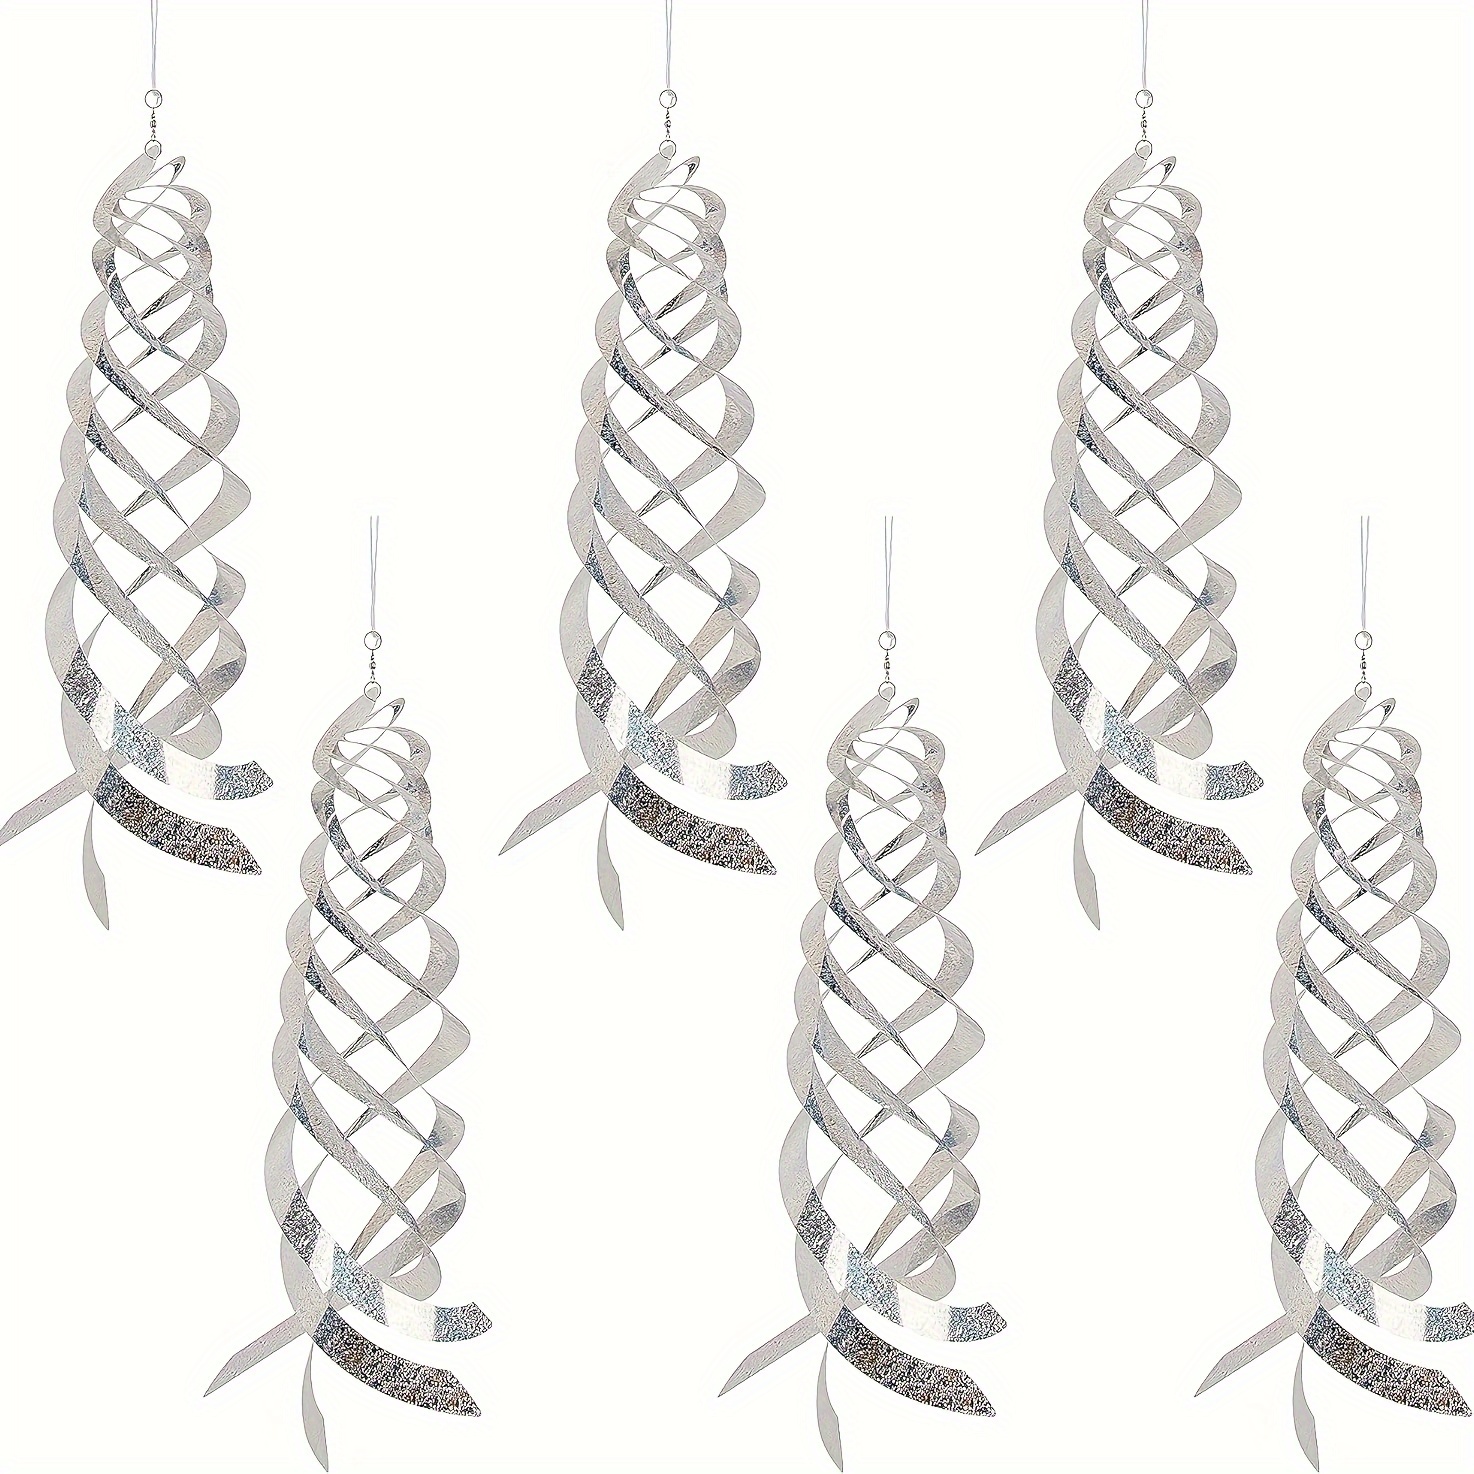 

6 Packs, Bird Repellent Spiral Reflectors Silver Mylar Spinner, Hanging Reflective Bird Deterrent Device, Garden Decorative Scare Birds Away, Like Woodpeckers, Pigeons And Geese, 6 Pack